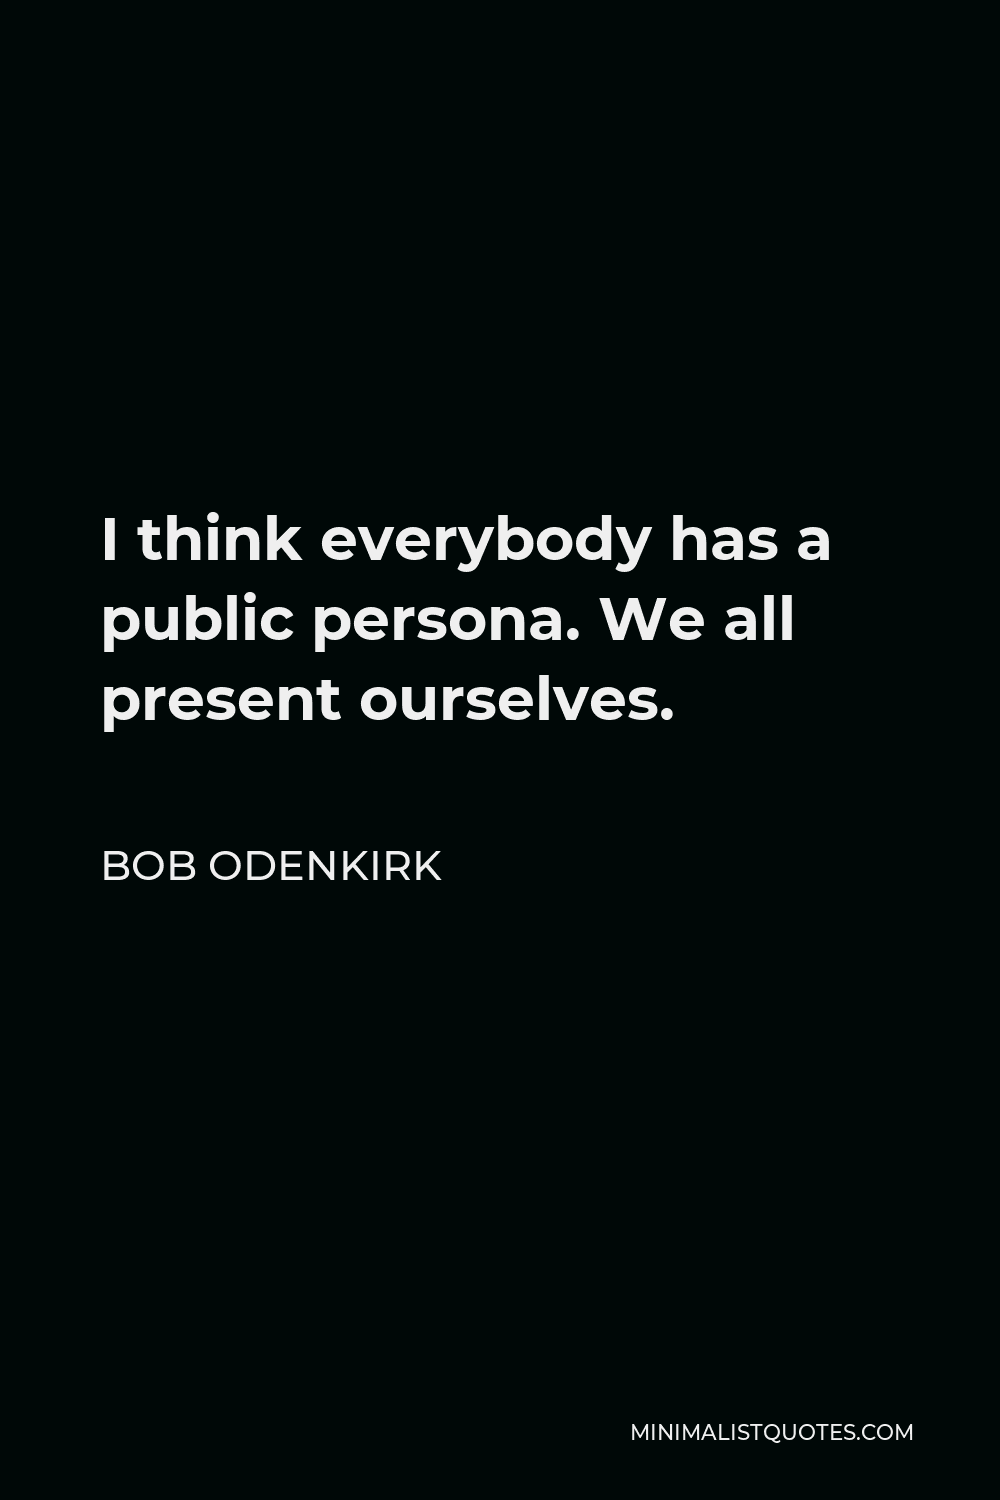 Bob Odenkirk Quote - I think everybody has a public persona. We all present ourselves.